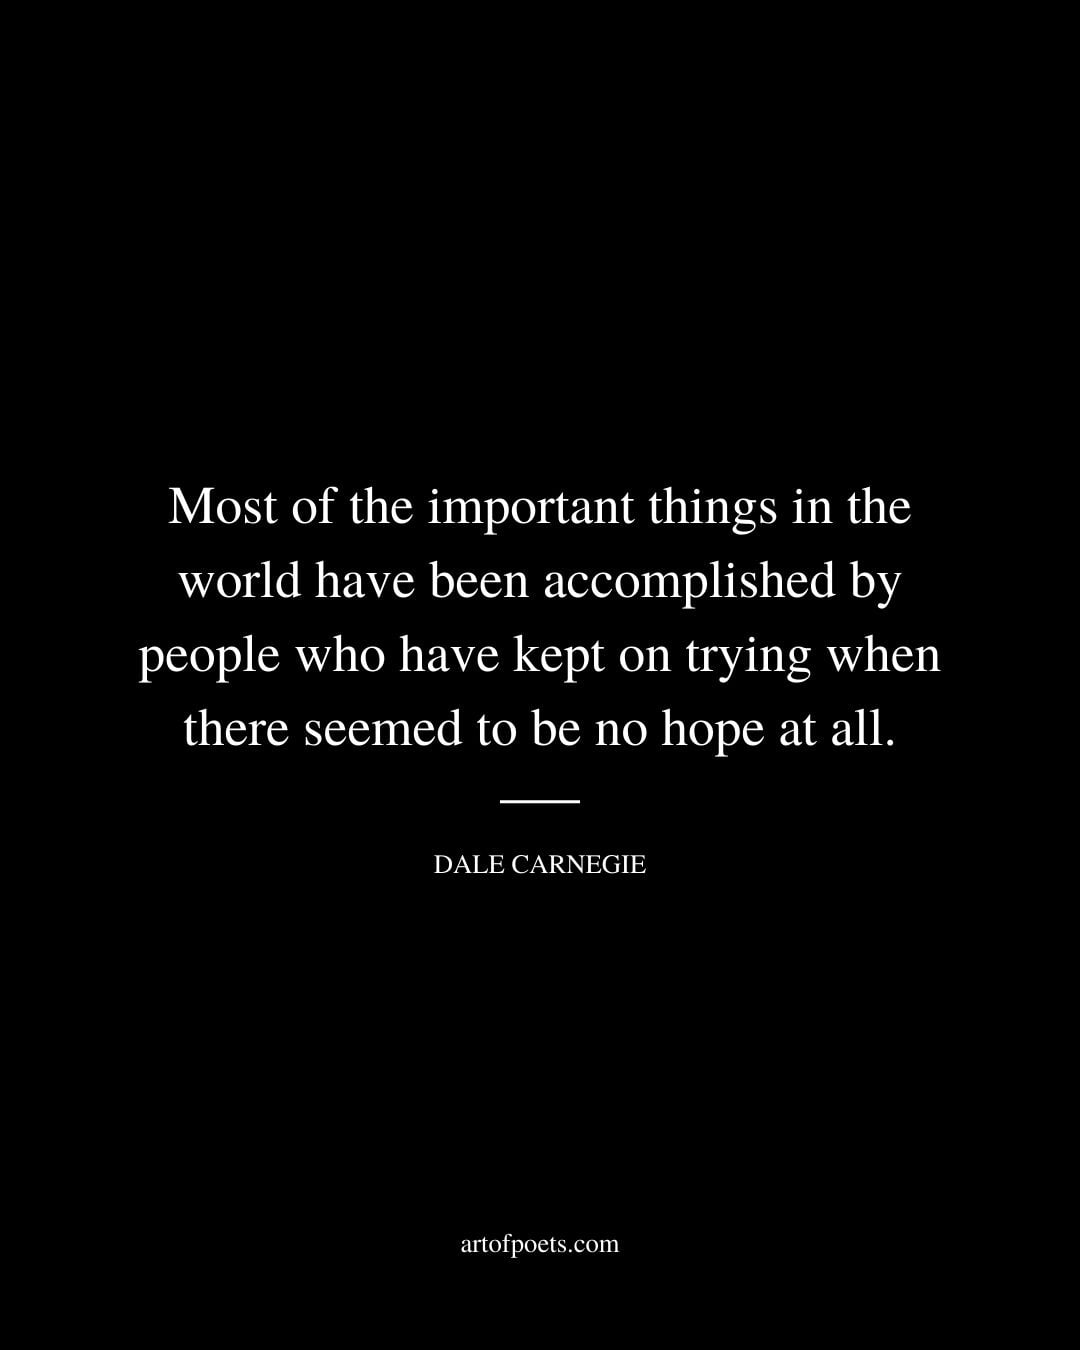 Most of the important things in the world have been accomplished by people who have kept on trying